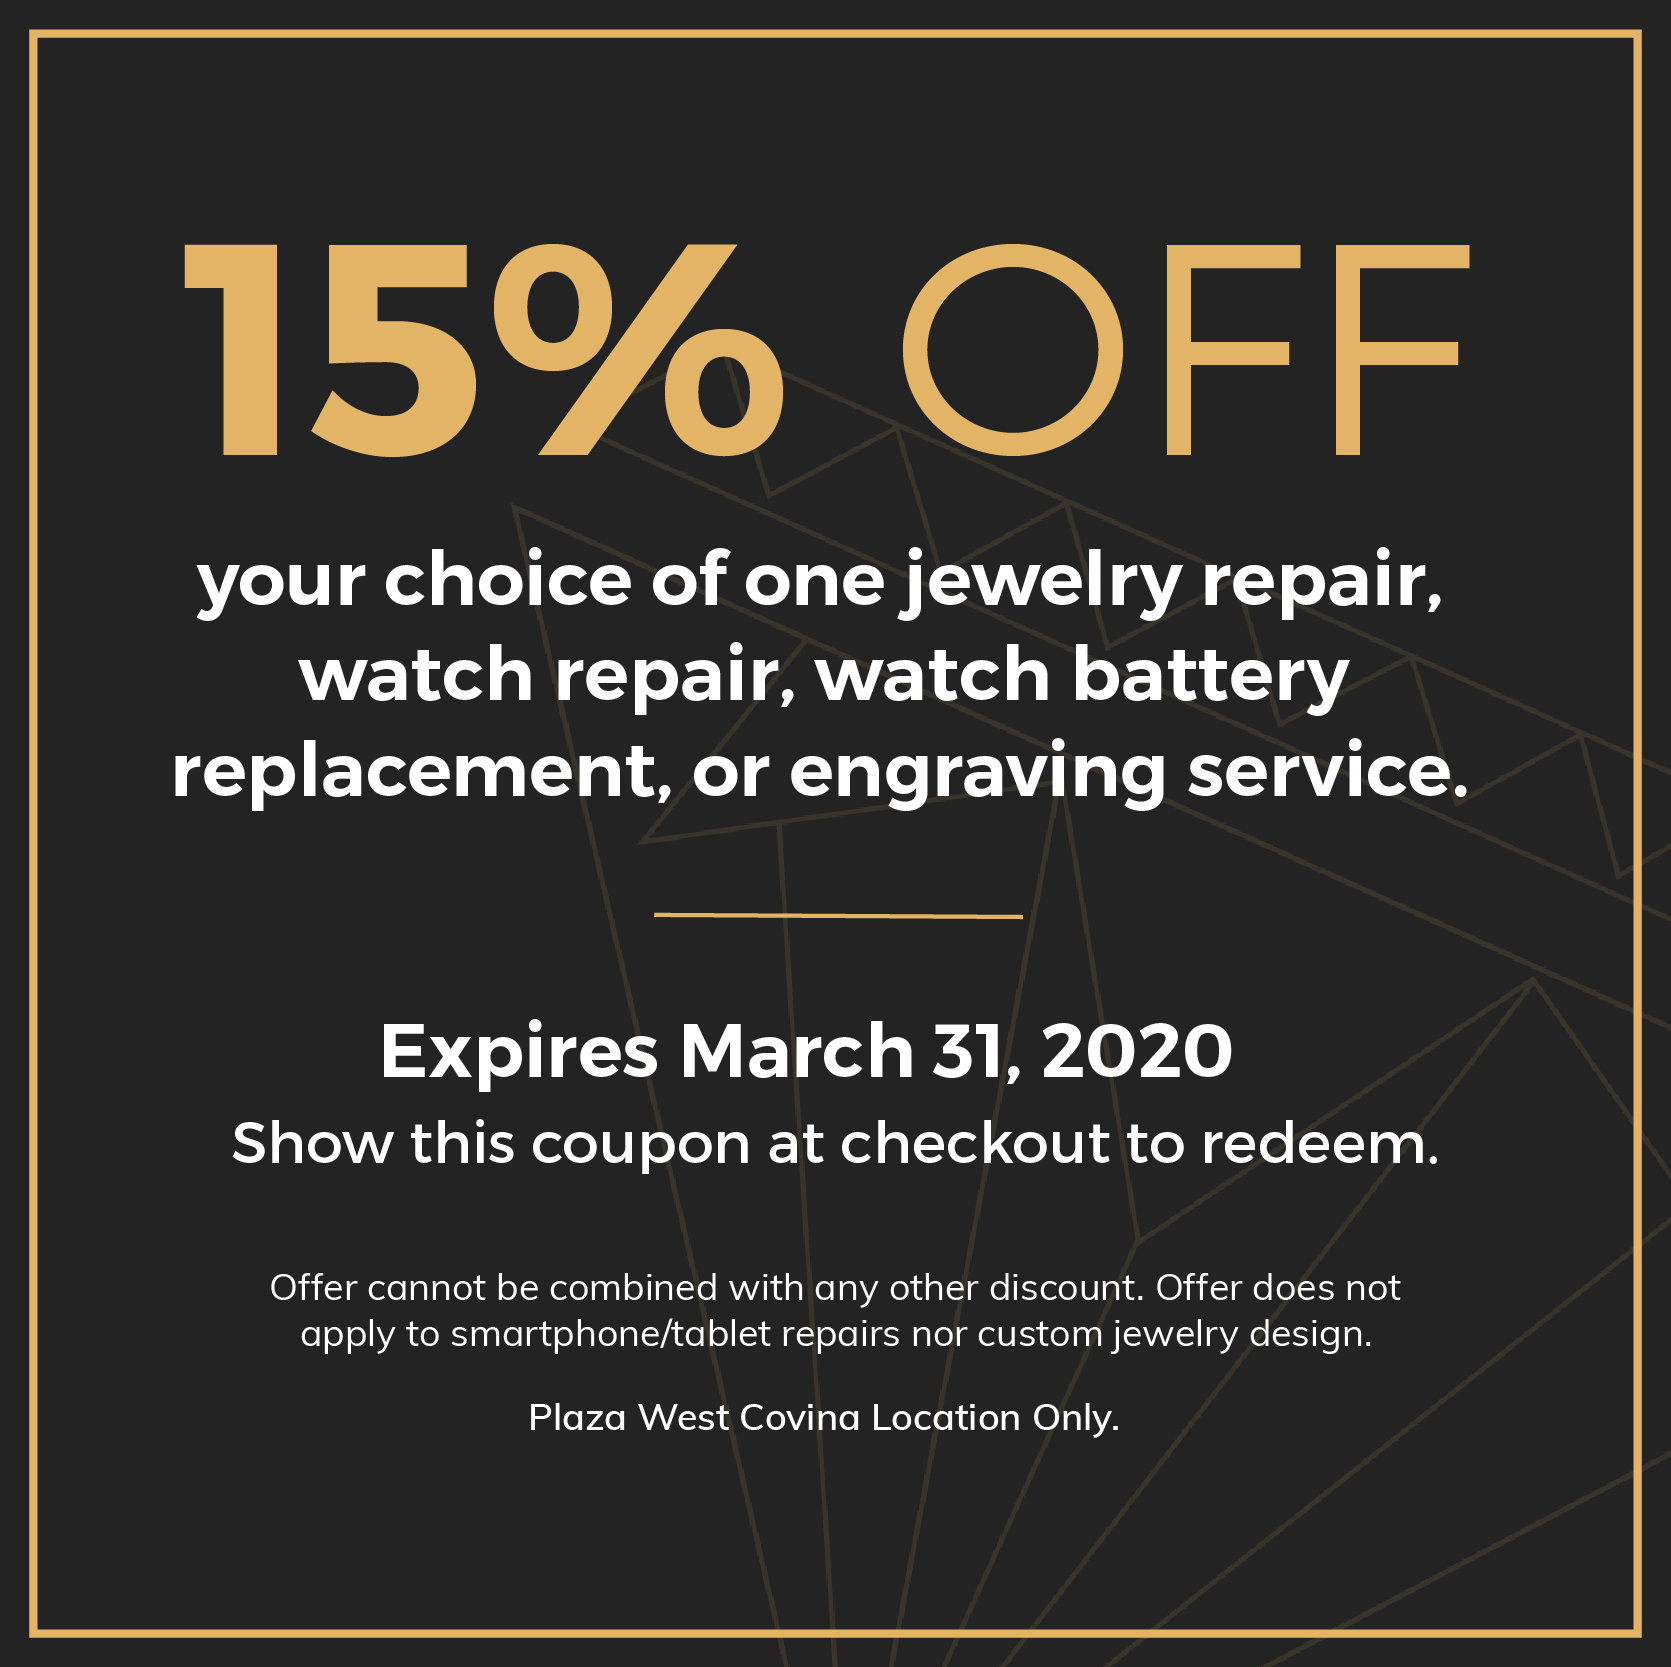 15% OFF. your choice of one jewelry repair, watch repair, watch battery replacement, or engraving service. Expires March 31, 2020. Show this coupon at checkout to redeem. Offer cannot be combined with any other discount. Offer does not apply to smartphone/tablet repairs nor custom jewelry design. Plaza West Covina Location Only.